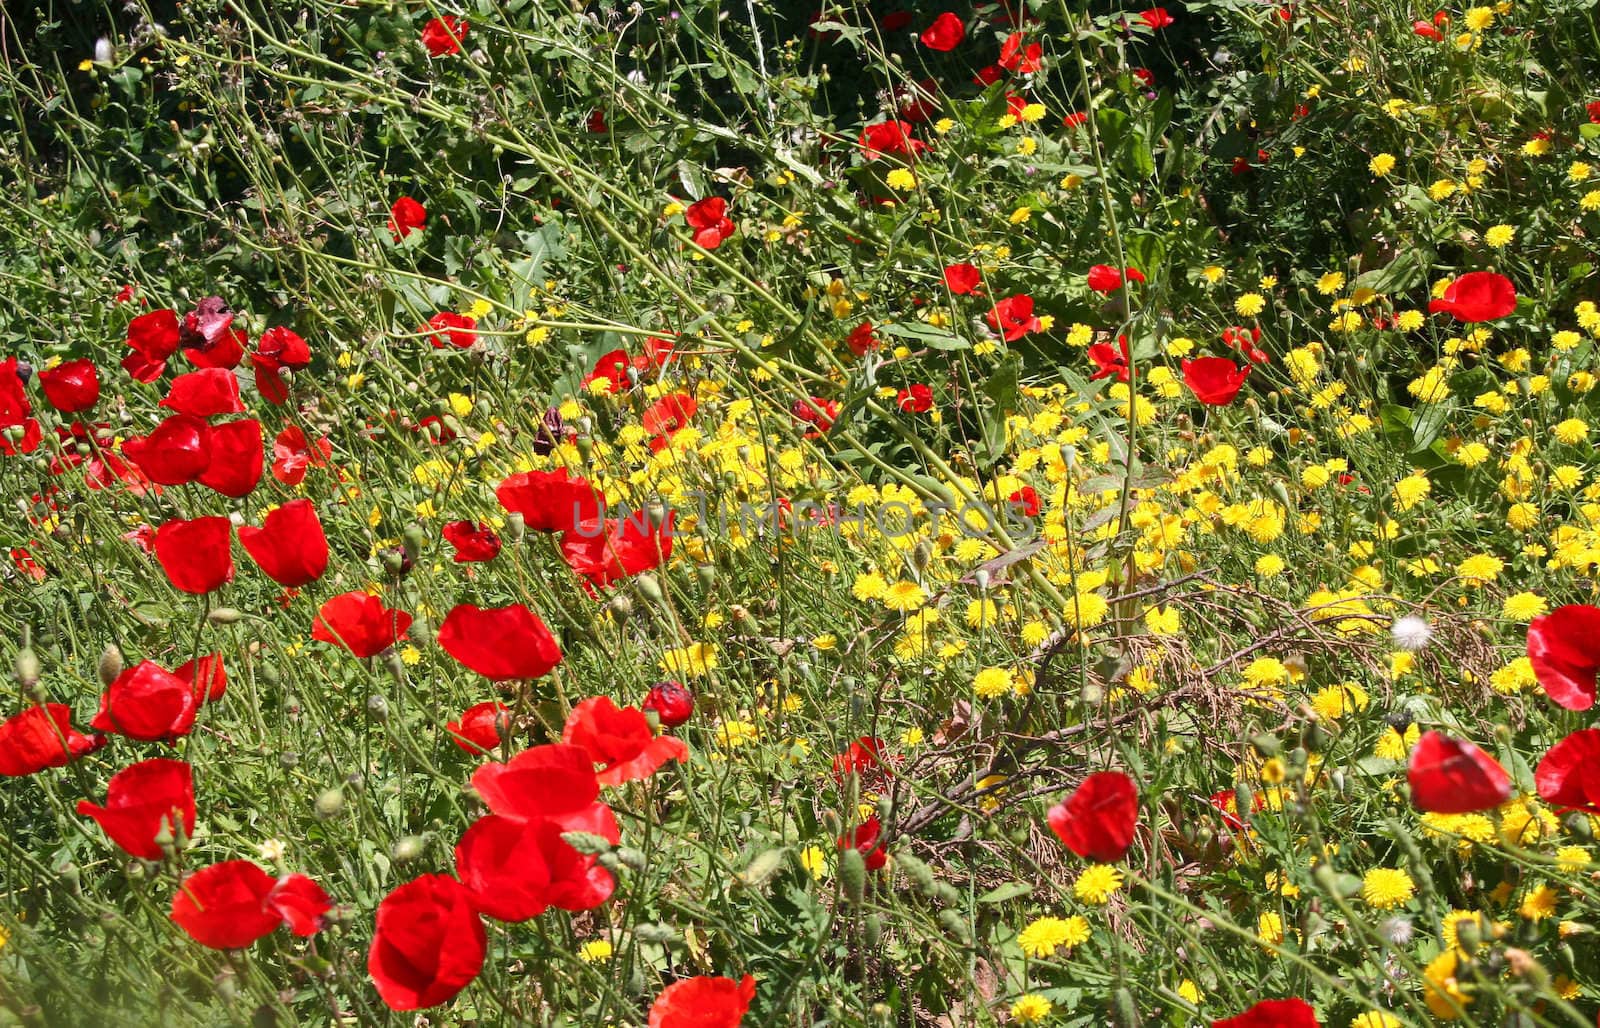 Poppies and other wild flowers